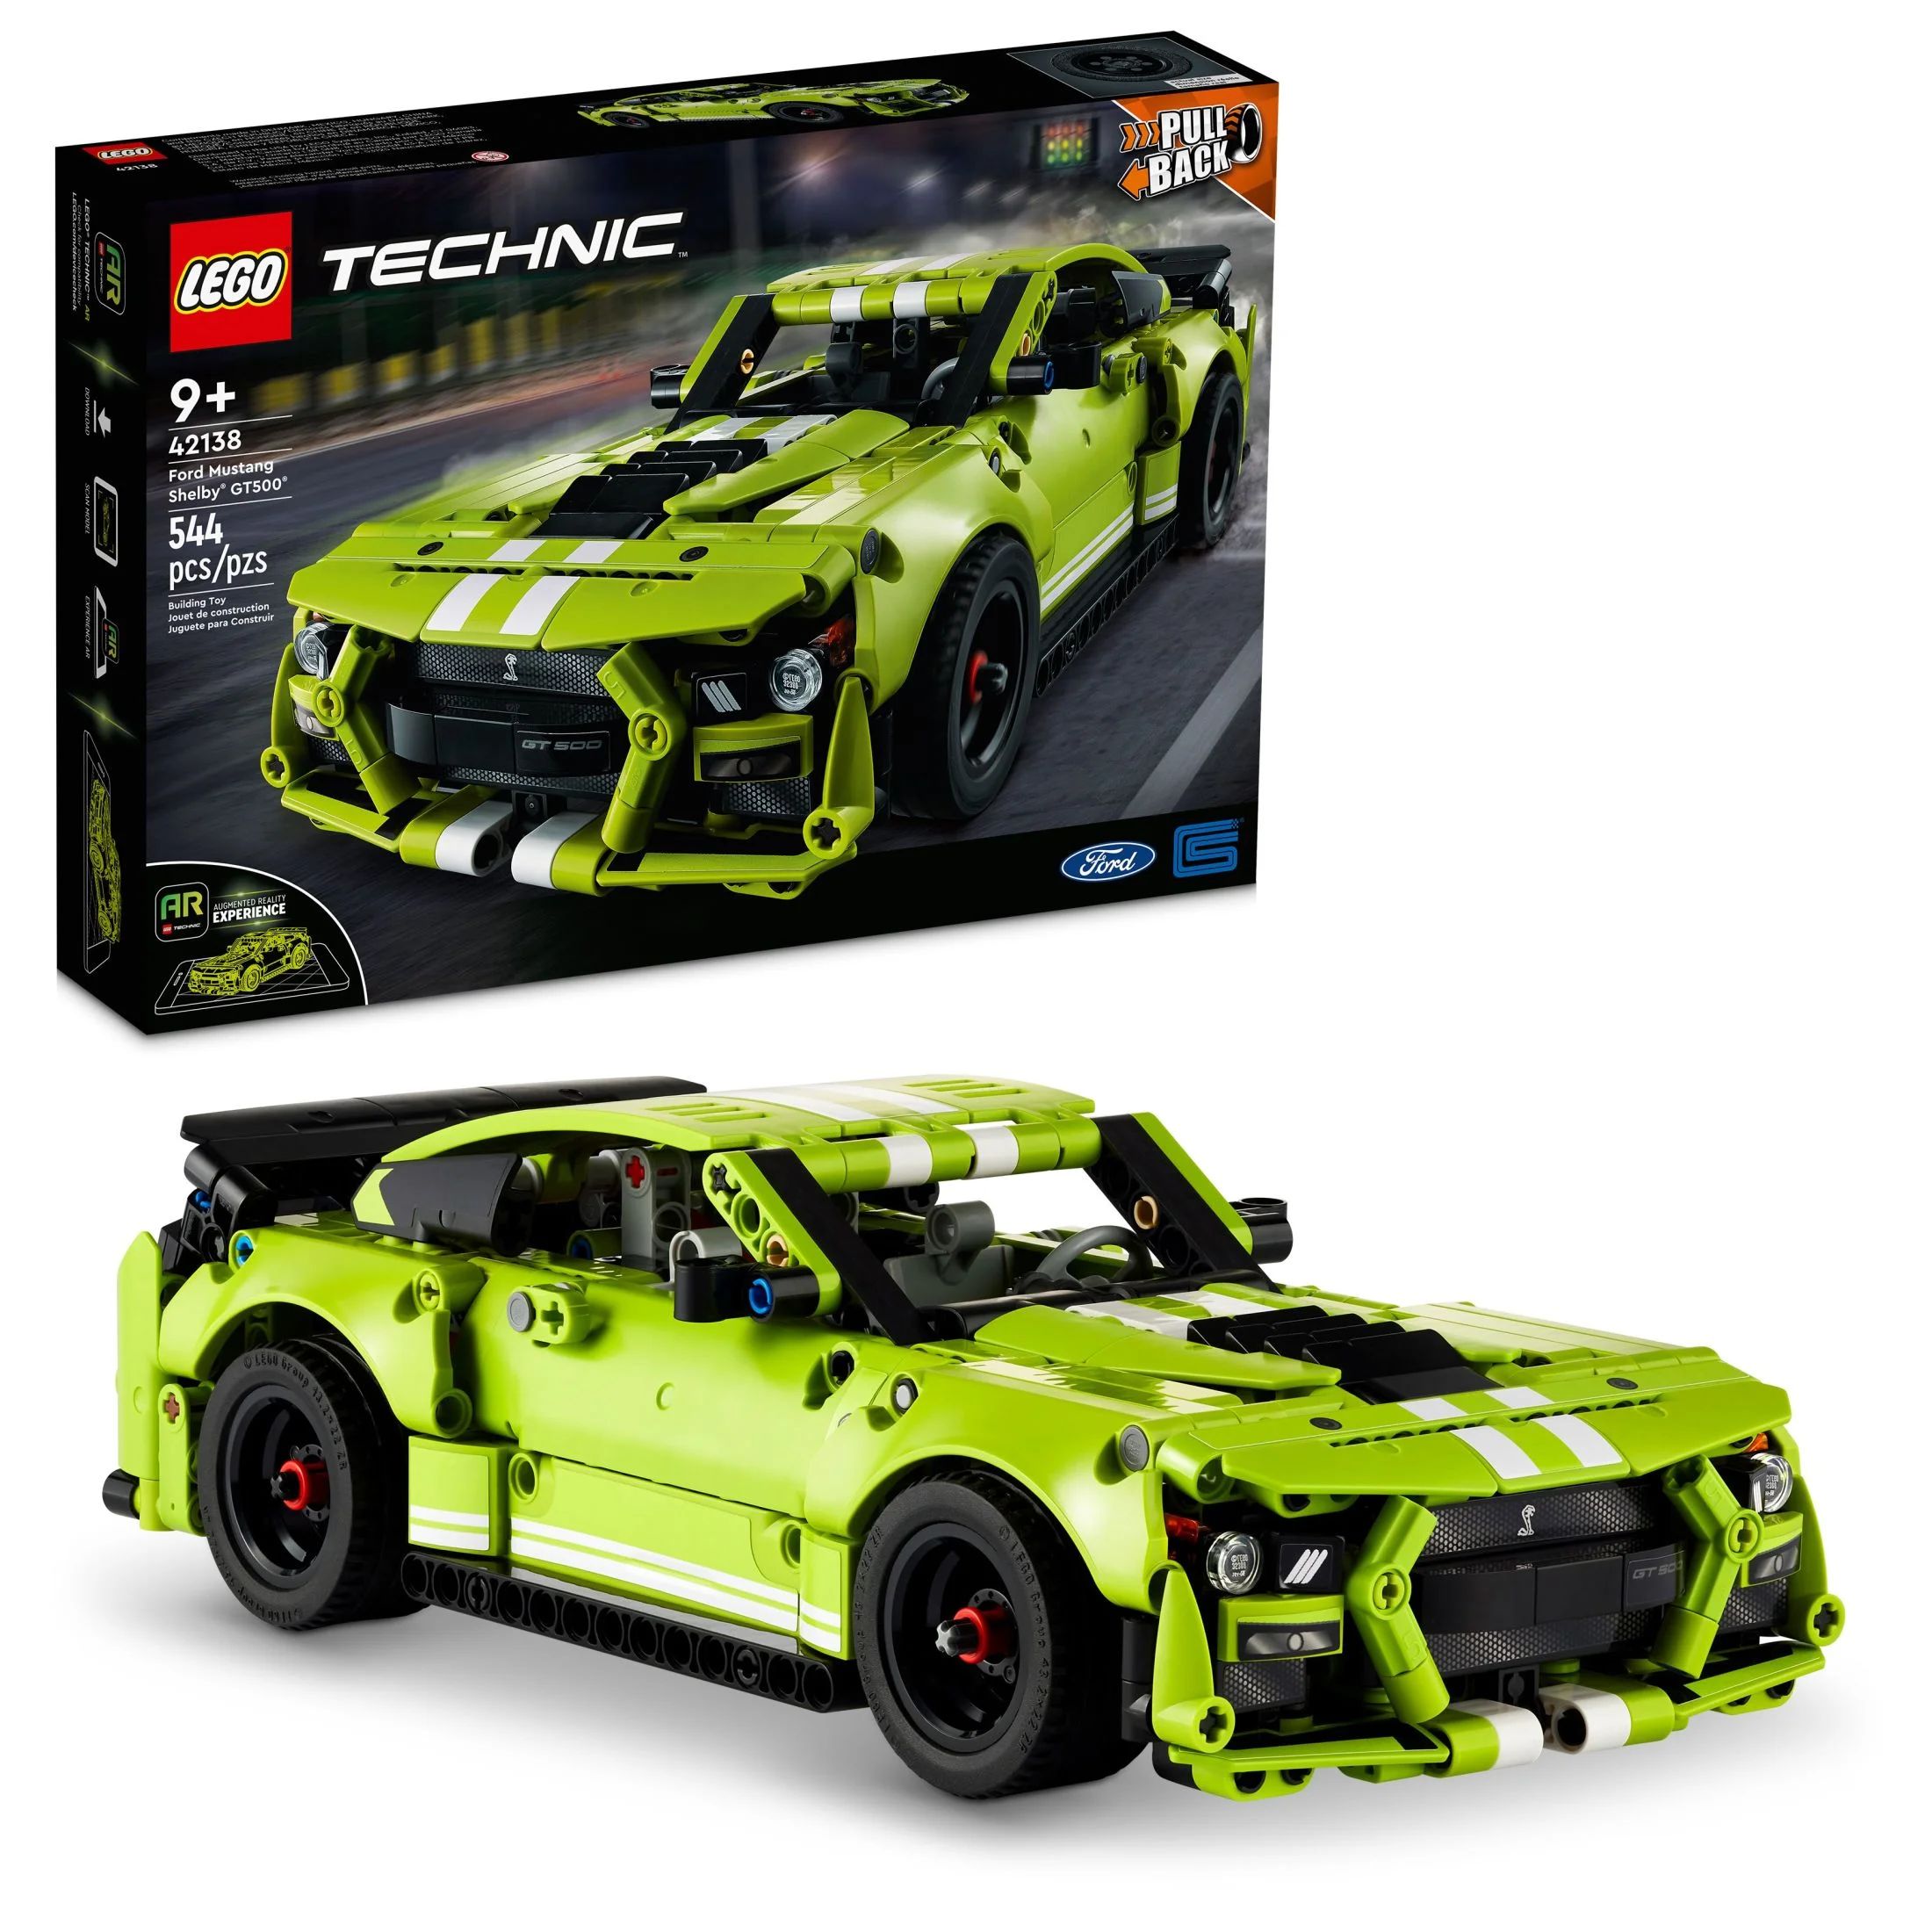 LEGO Technic Ford Mustang Shelby GT500 Building Set 42138 - Pull Back Drag Race Toy Car Model Kit... | Walmart (US)